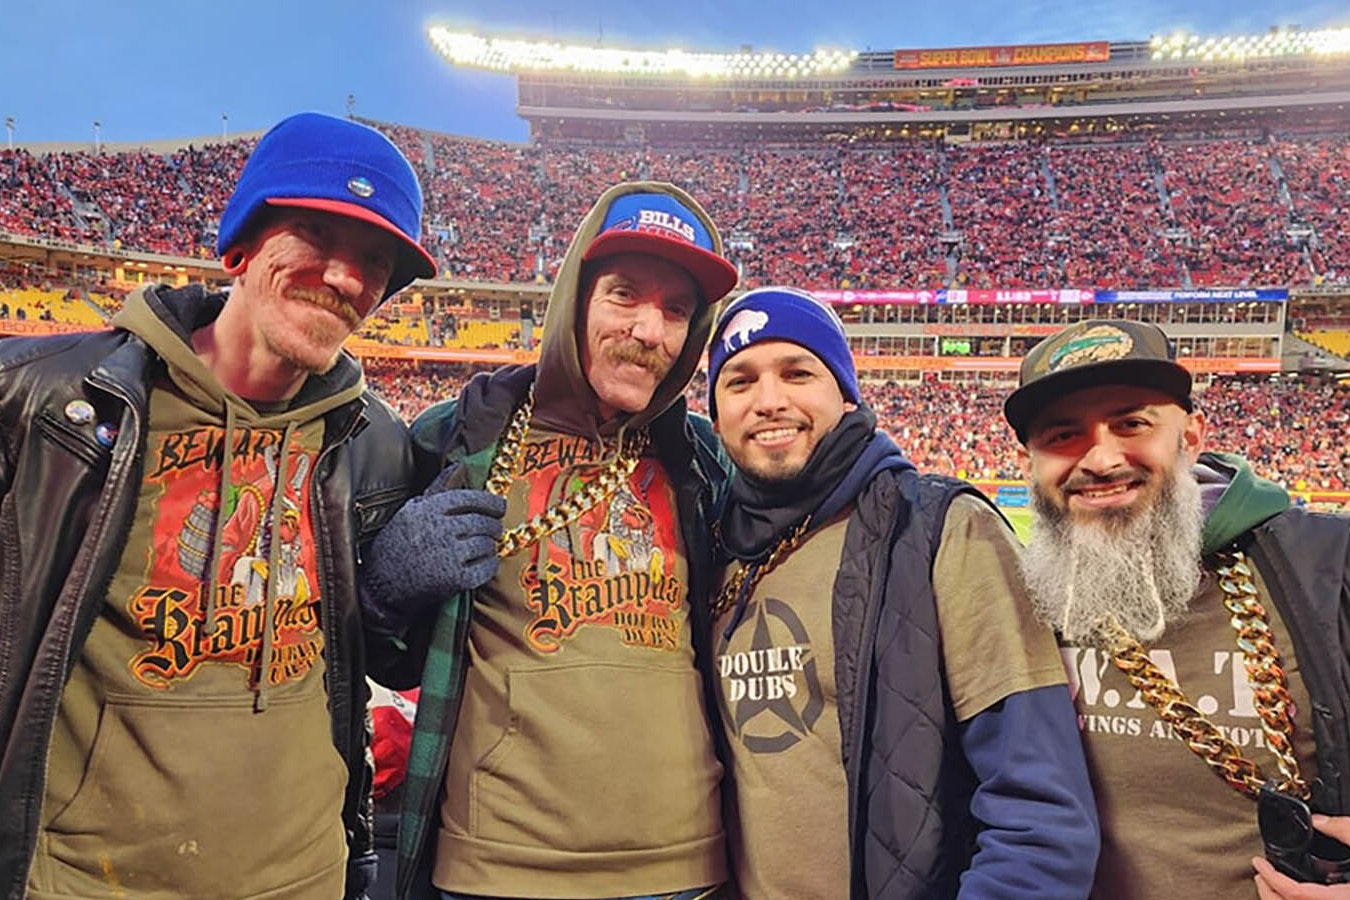 The Dubs Mafia represents the Buffalo Bills, and Wyoming Buffalo wings, strong in Kansas City last weekend.